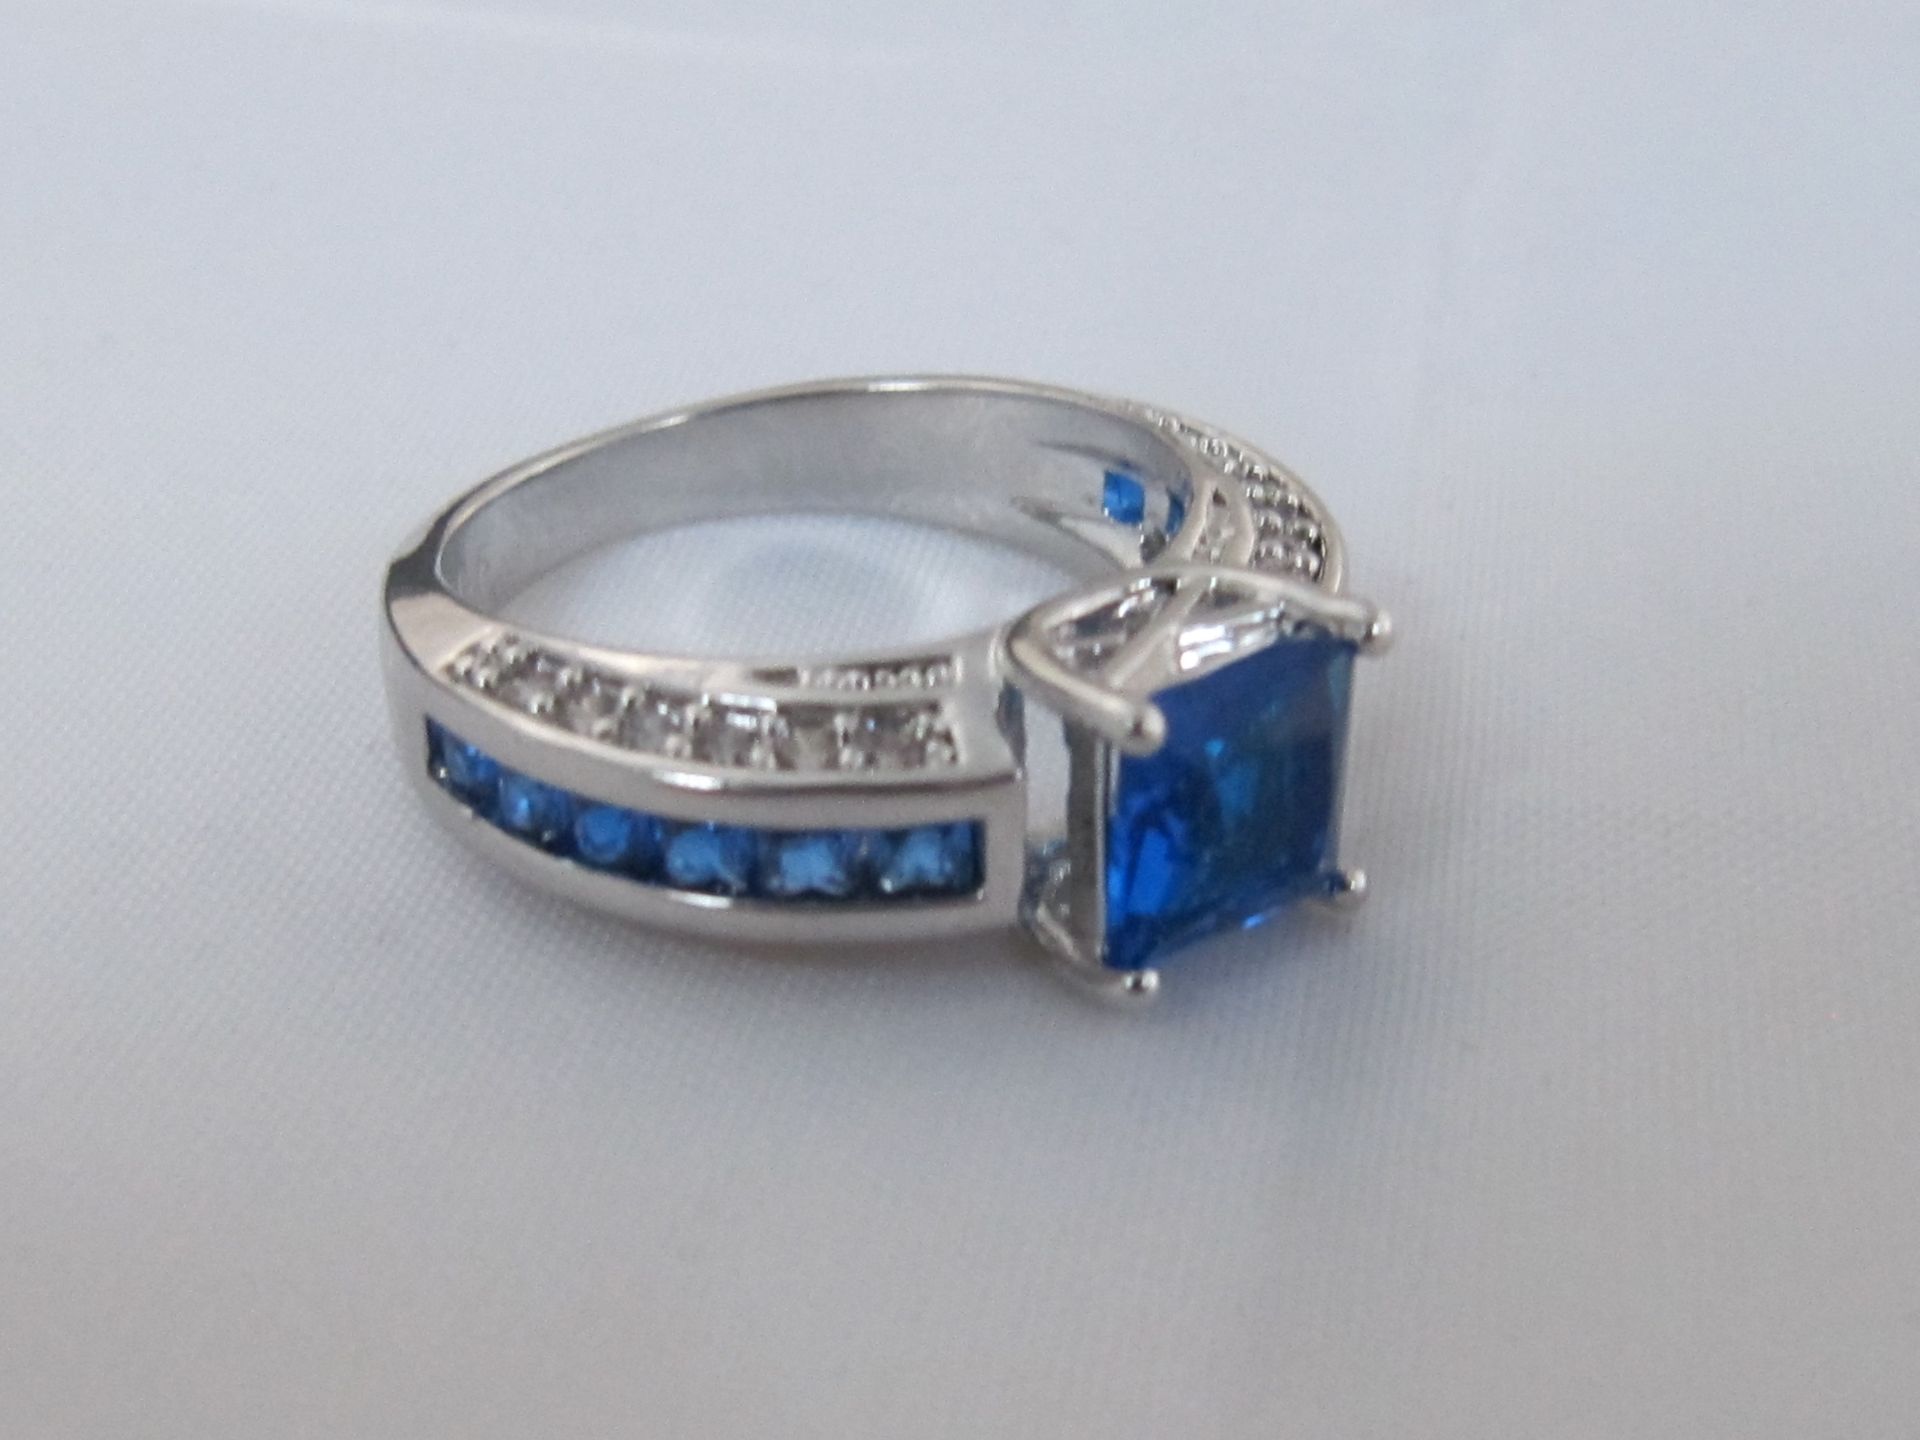 10k White Gold Filled with Blue Sapphires. Size S.